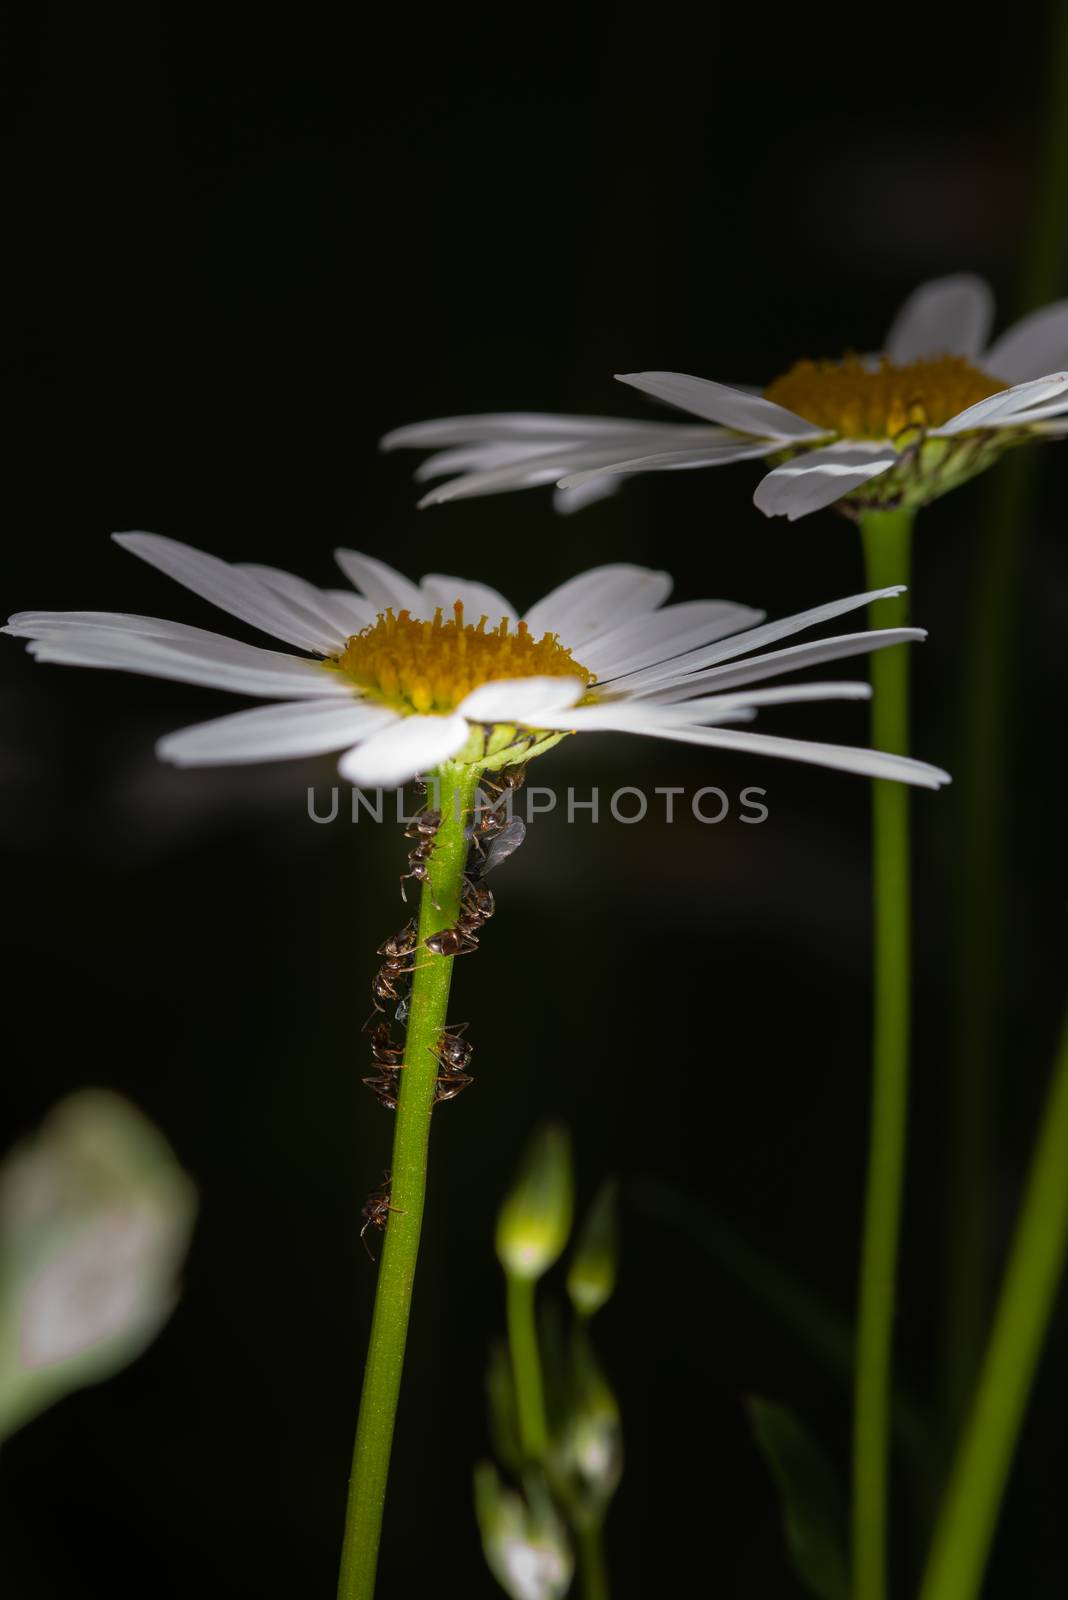 Ants collecting and feeding honeydew from aphids on a daisy stem, macro, extreme close up, dark background